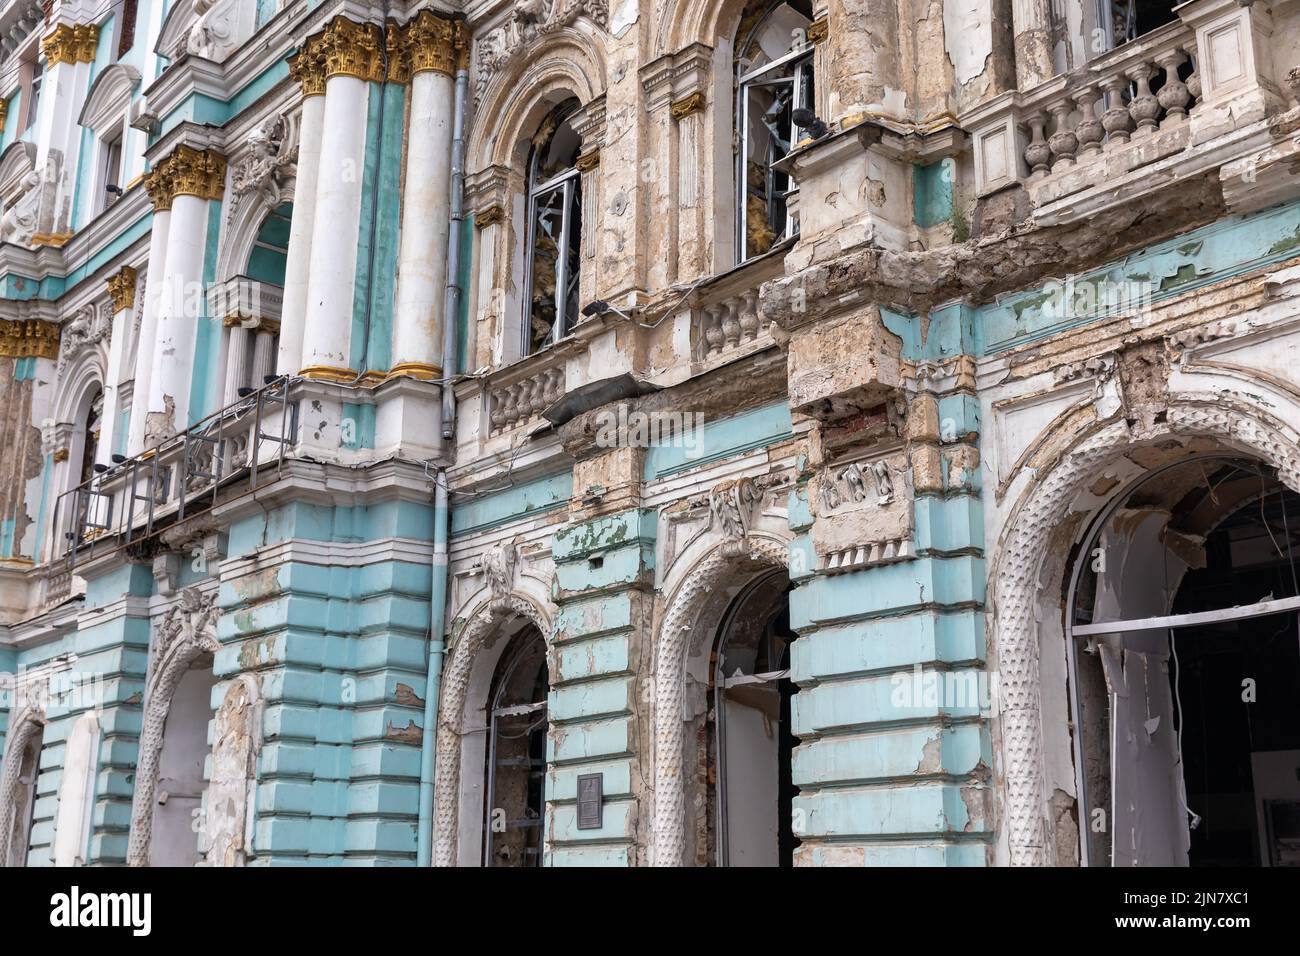 Damaged architectural monument of the city of  Kharkiv, broken windows and damaged facade of the building are visible due to Russian shelling in Kharkiv. (Photo by Mykhaylo Palinchak / SOPA Images/Sipa USA) Stock Photo